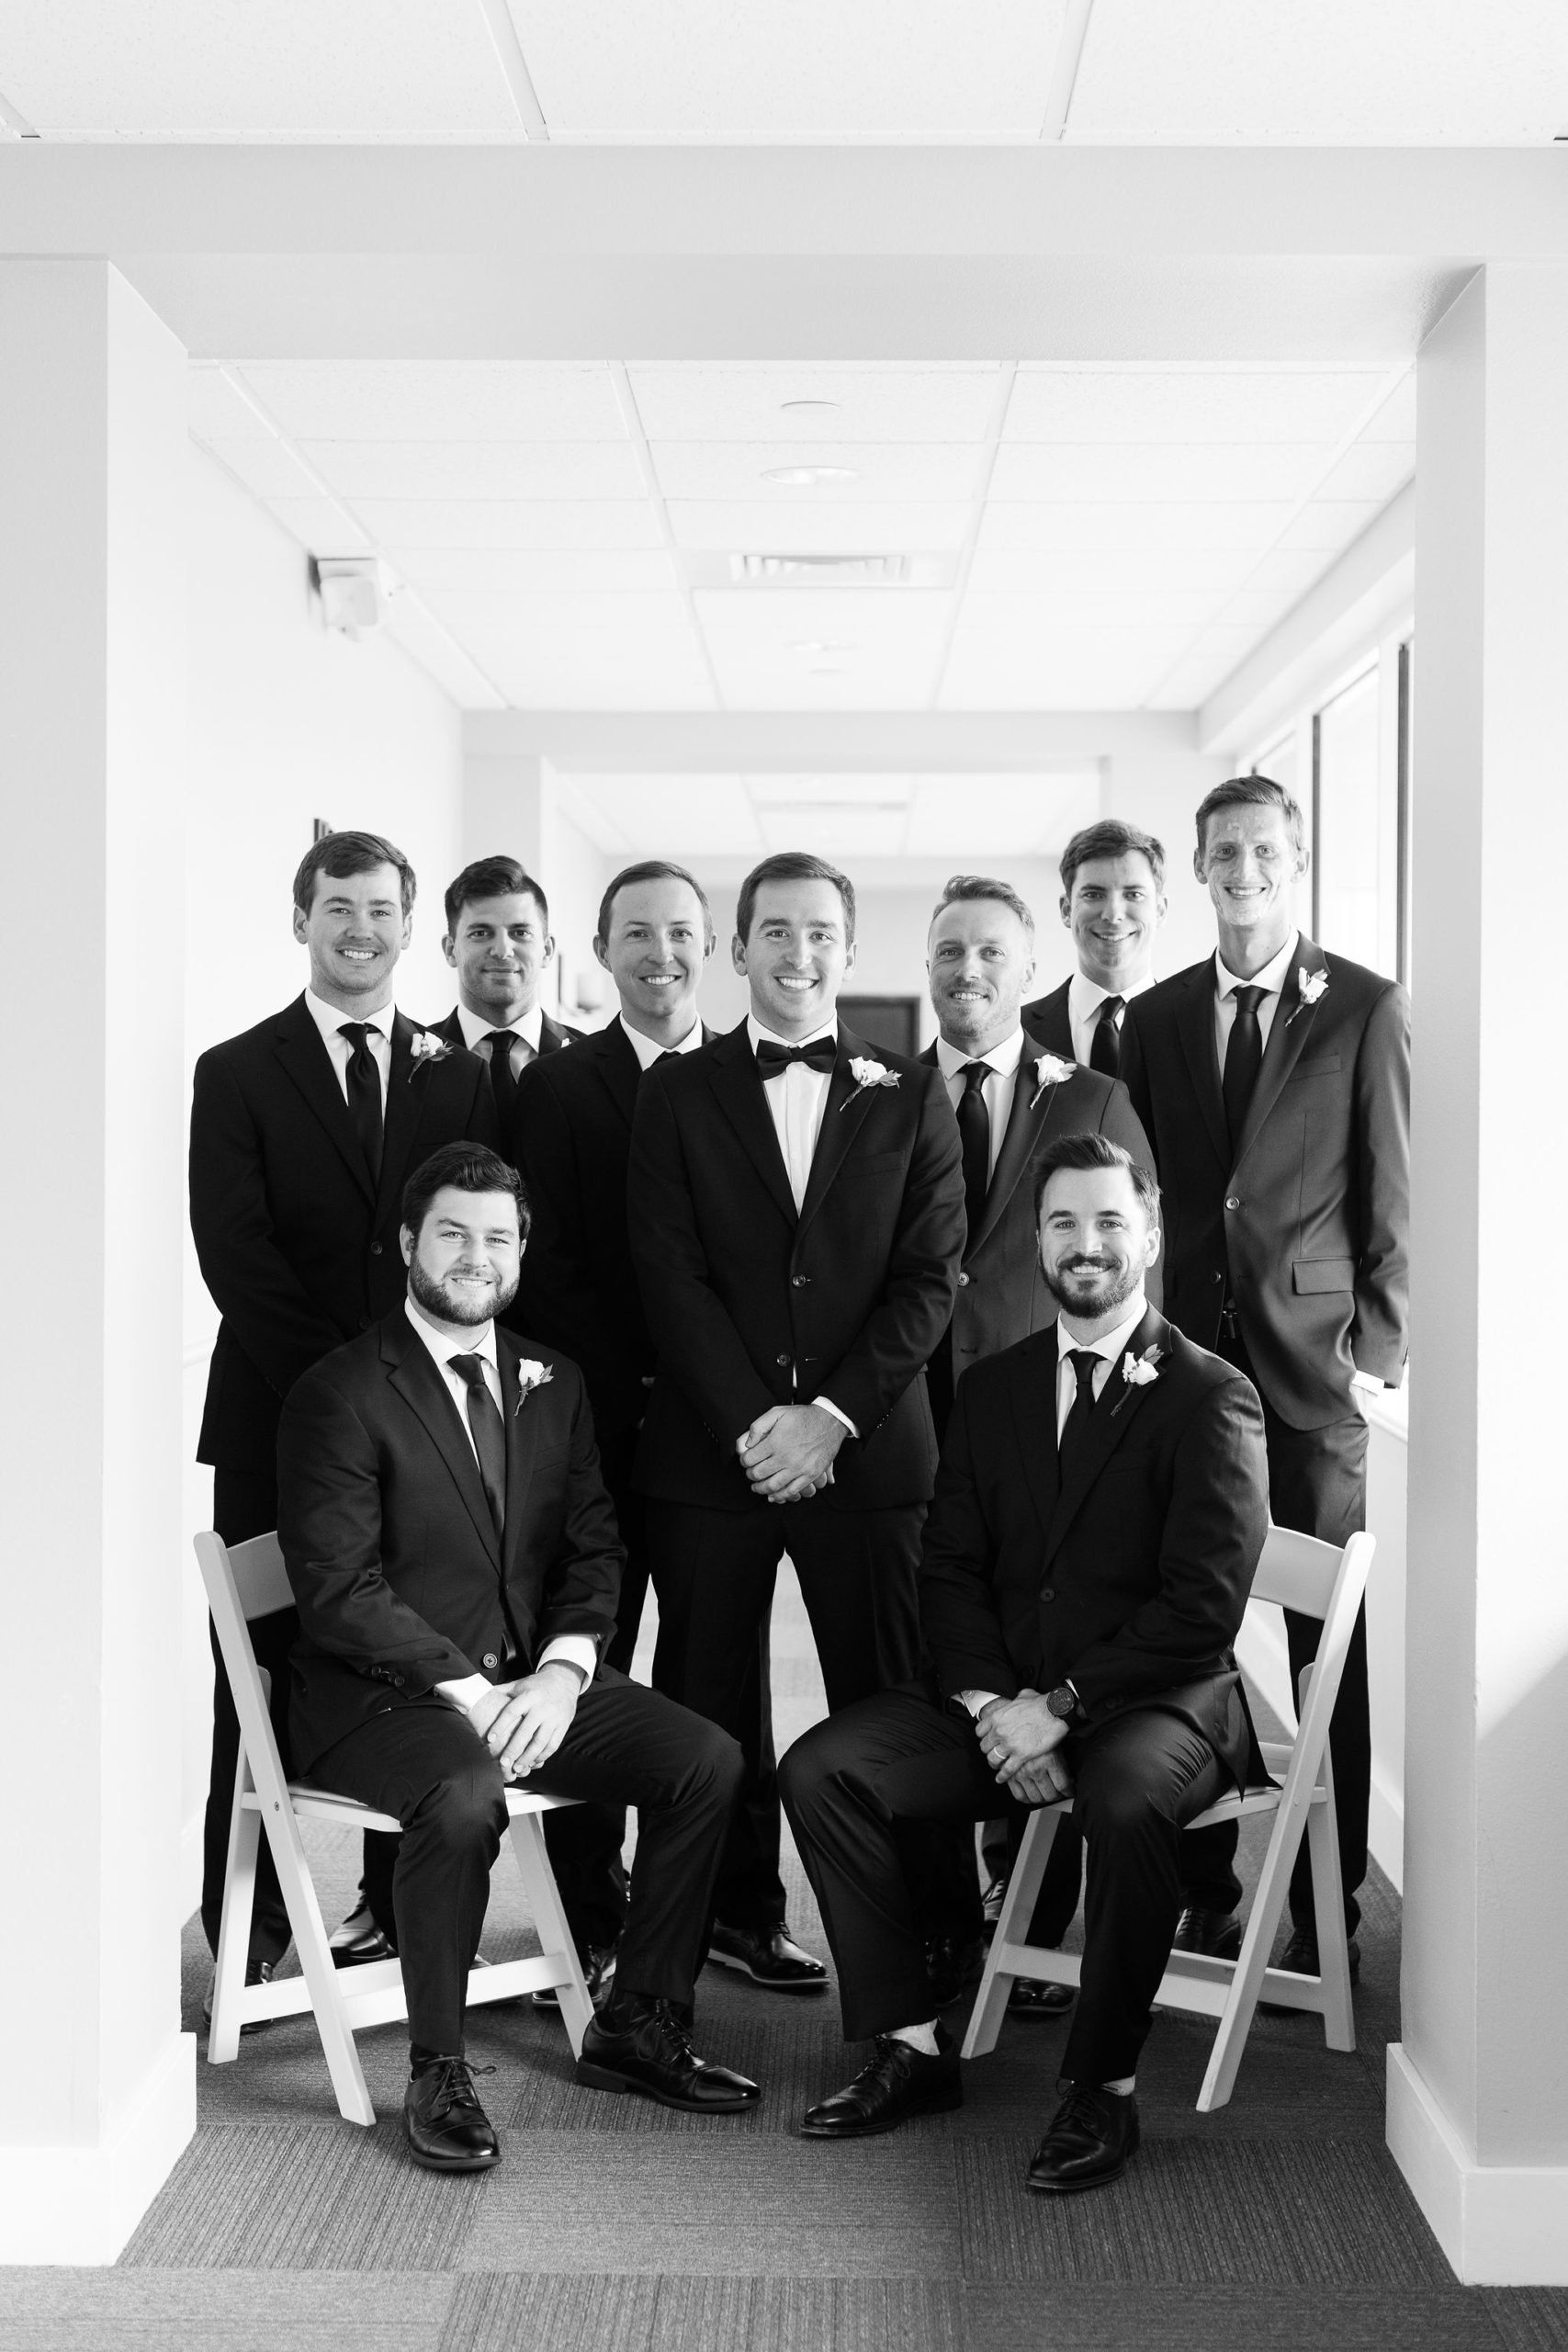 Wedding Photographer Jommy Photography captures a black and white portrait of the groom with his groomsmen. Black and white groomsment portrait. Timeless wedding style ideas and portraits by Jommy Photography.
